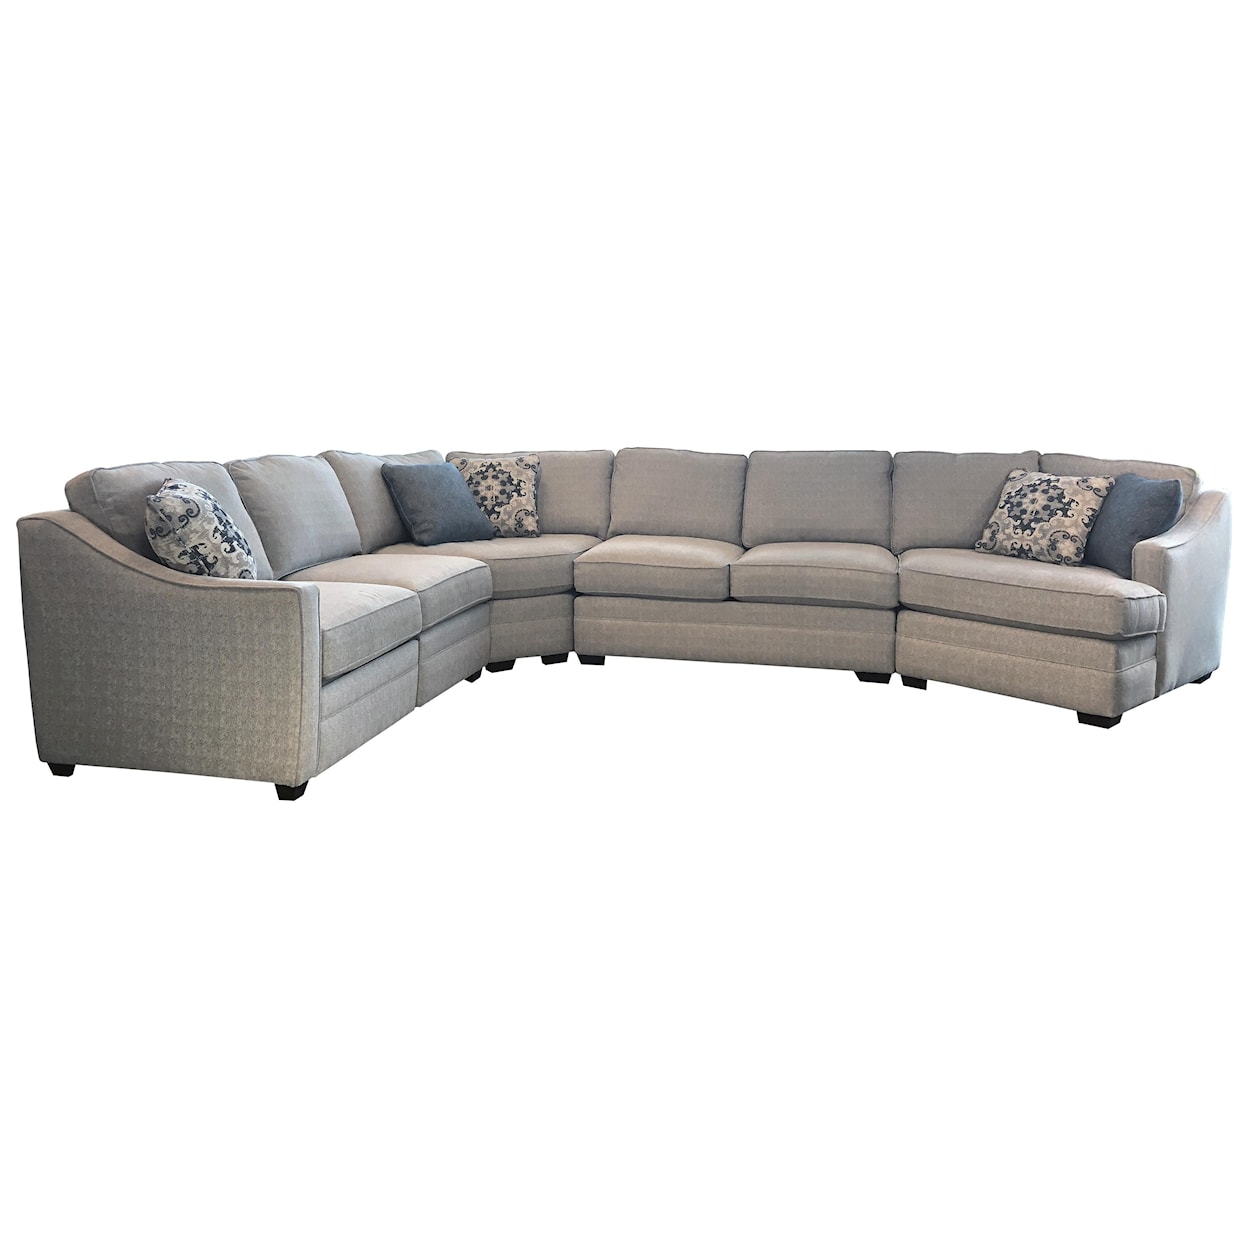 Hickory Craft F9 Series Reclining Sectional